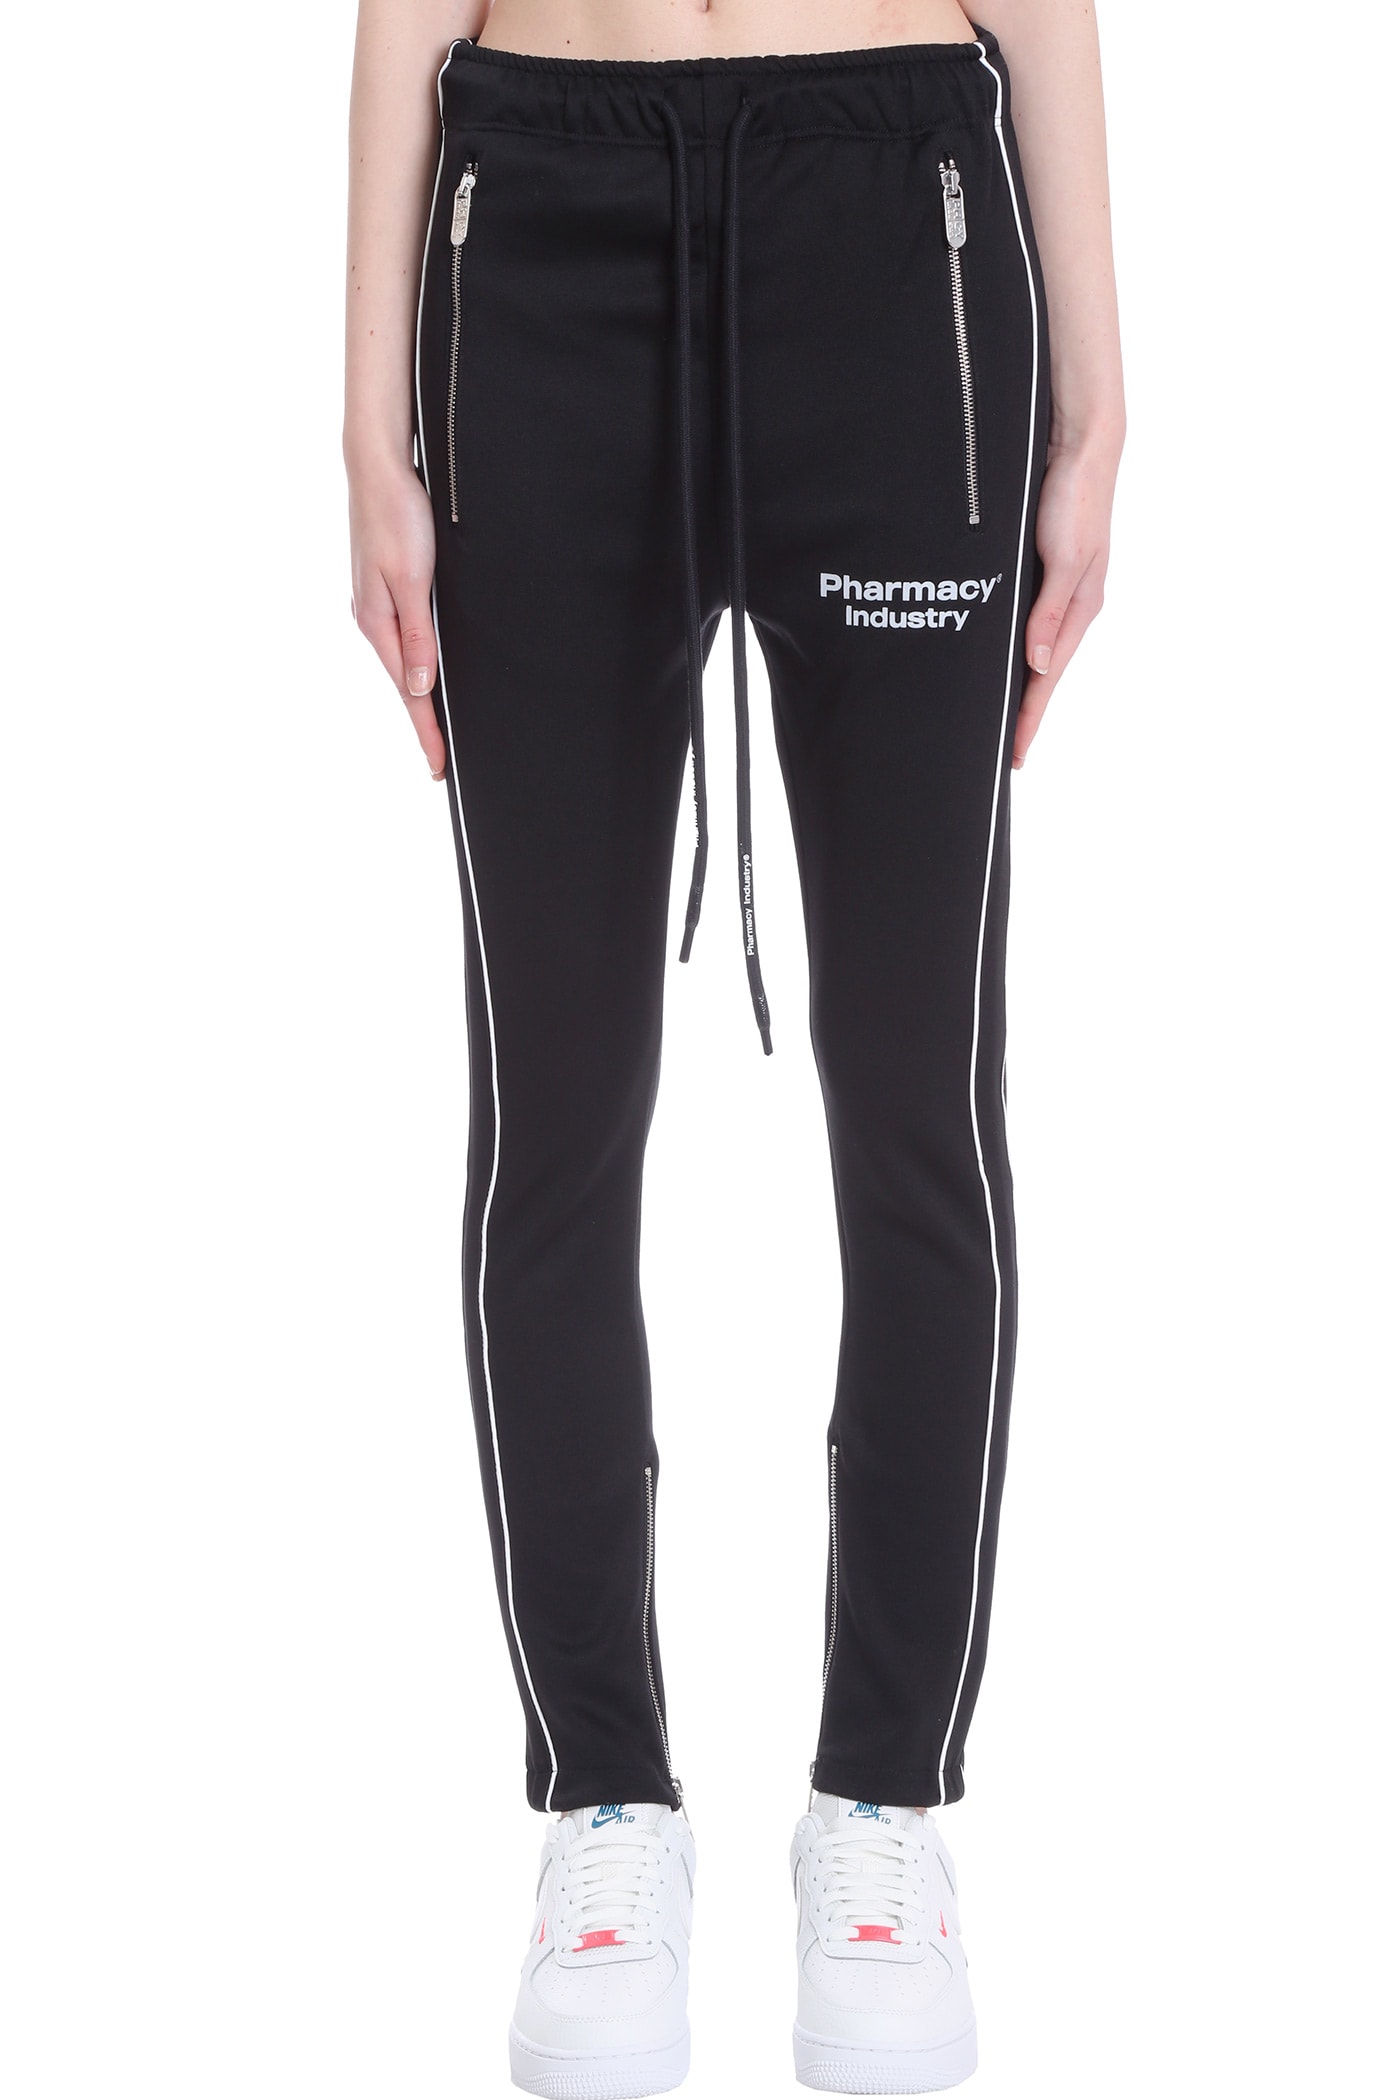 Pharmacy Industry Pants In Black Cotton